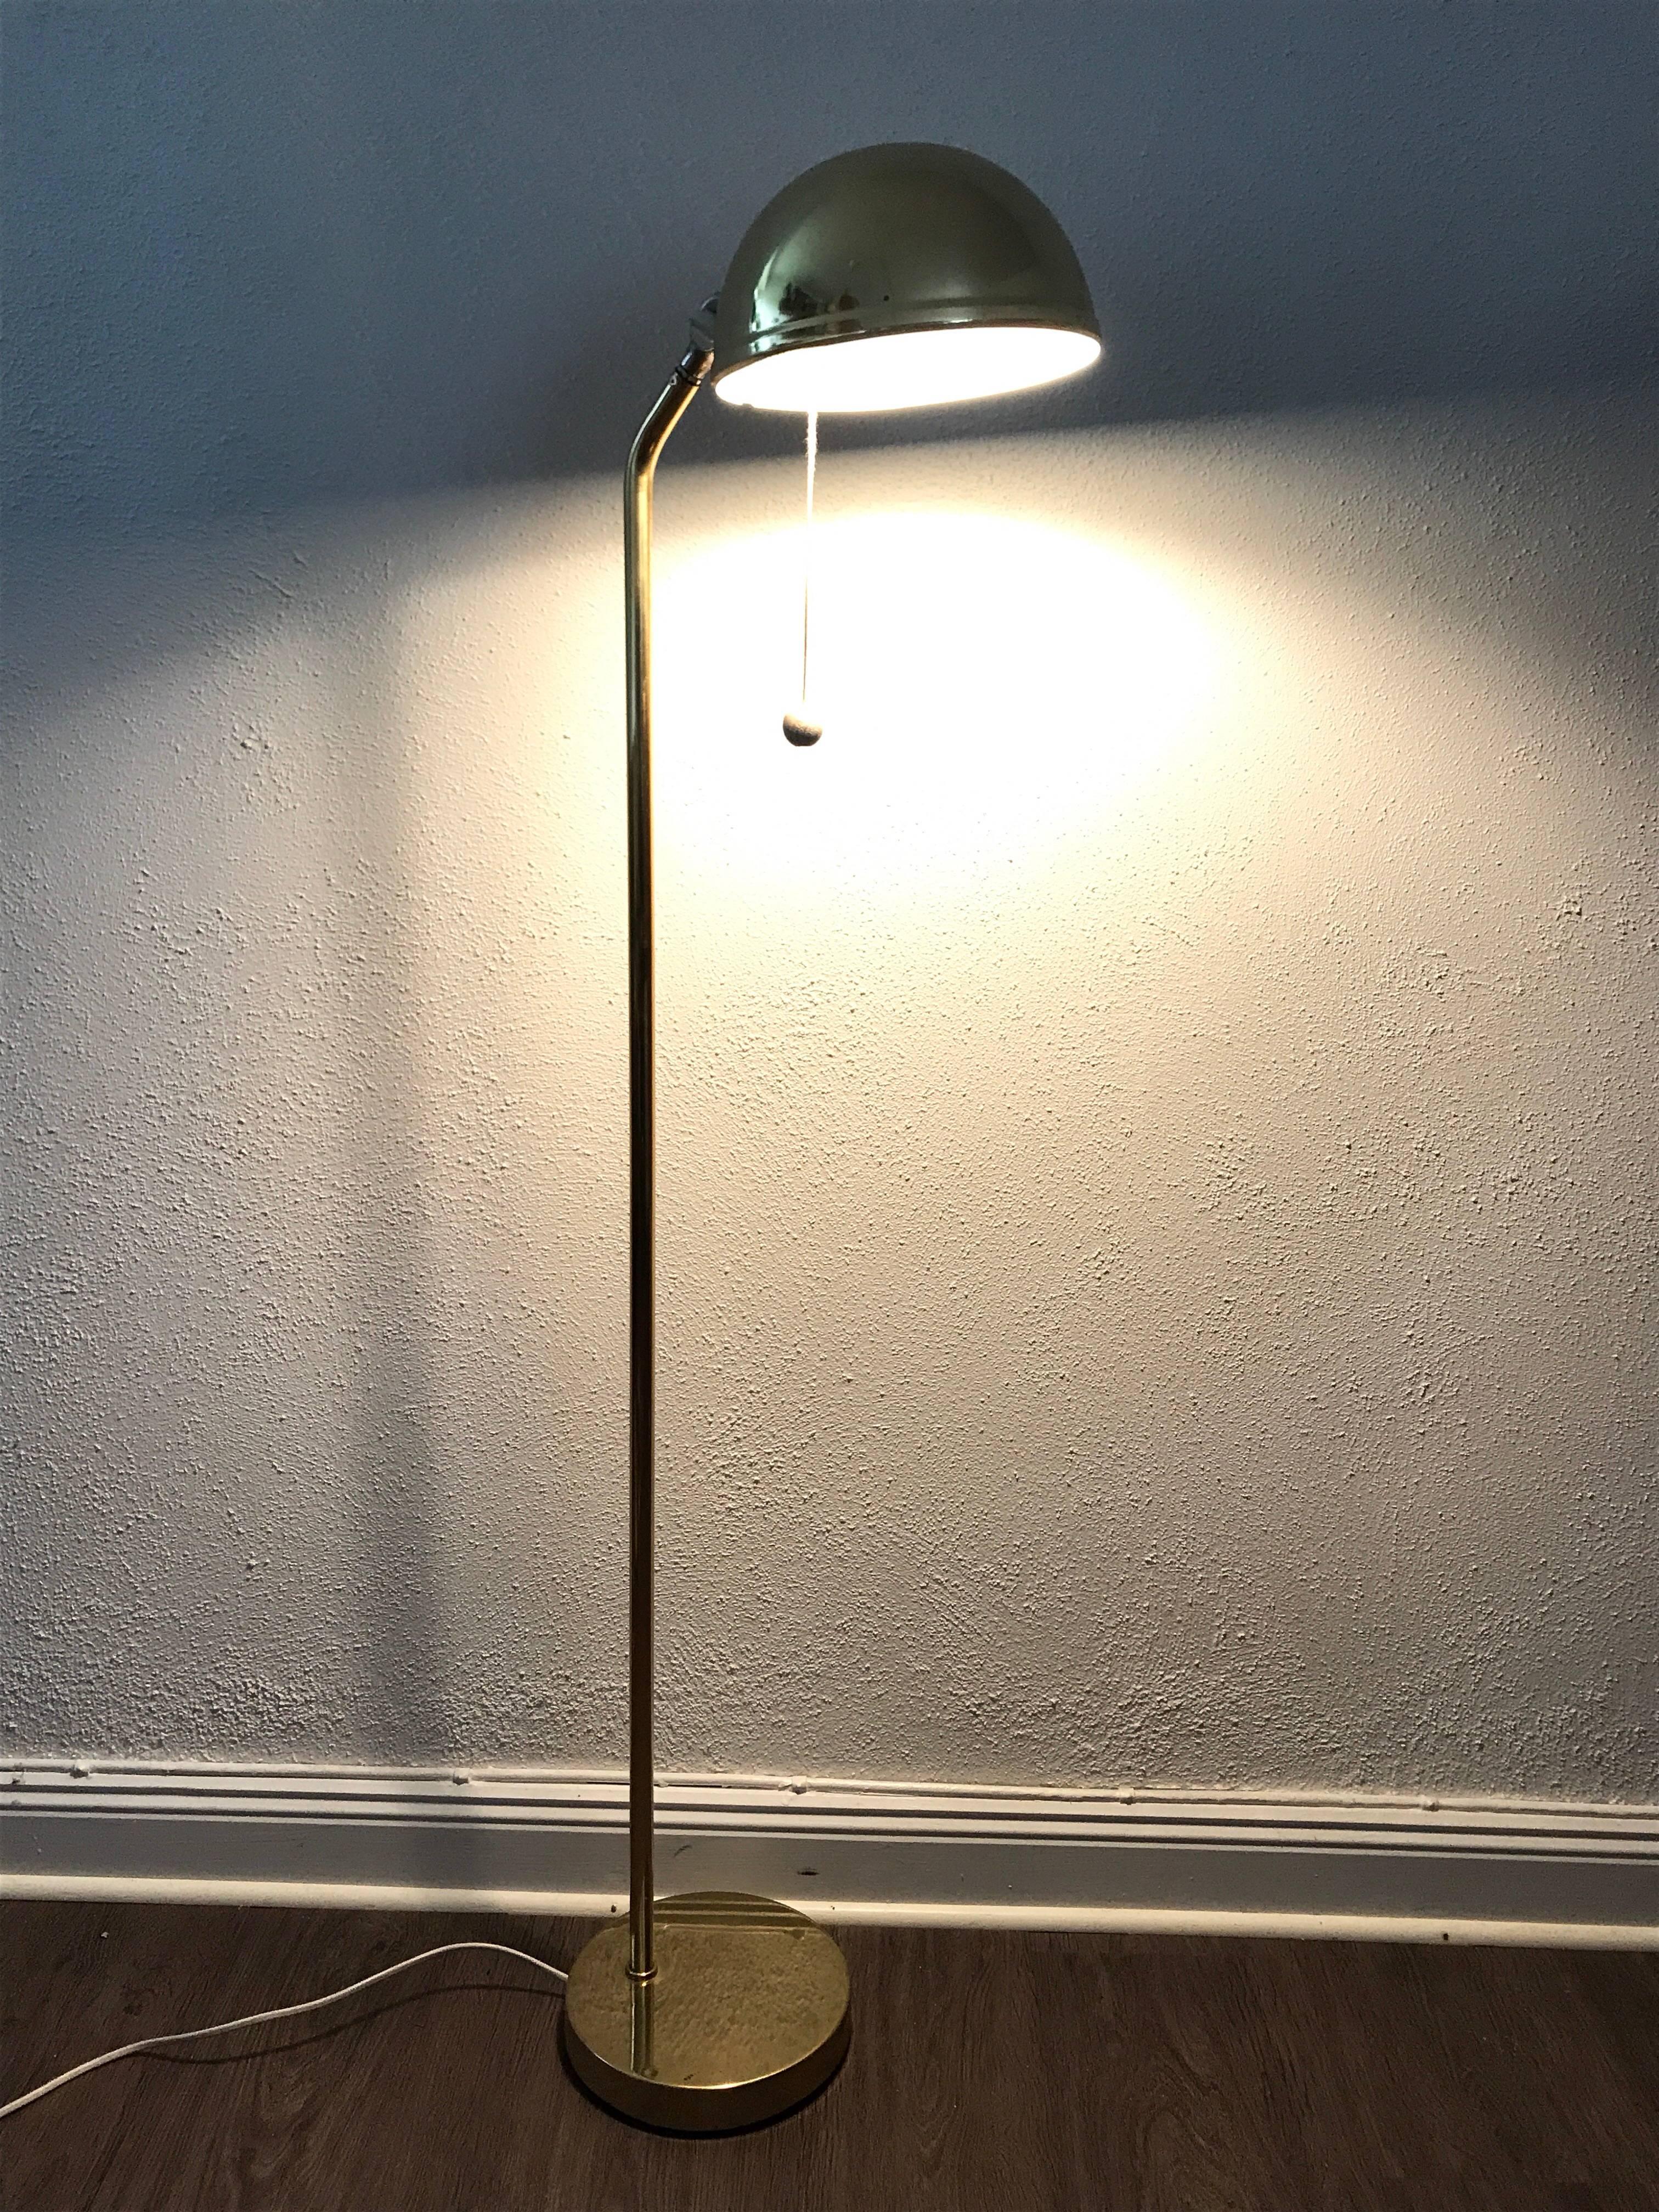 Pair of rare Danish Elit Brass Floor Lamps.  A very rare pair of Elit Brass floor lamps in top original condition manufactured in third quarter of the 20th c. 
The height is 115cm and the diameter of the base is 19cm. All electrical components have